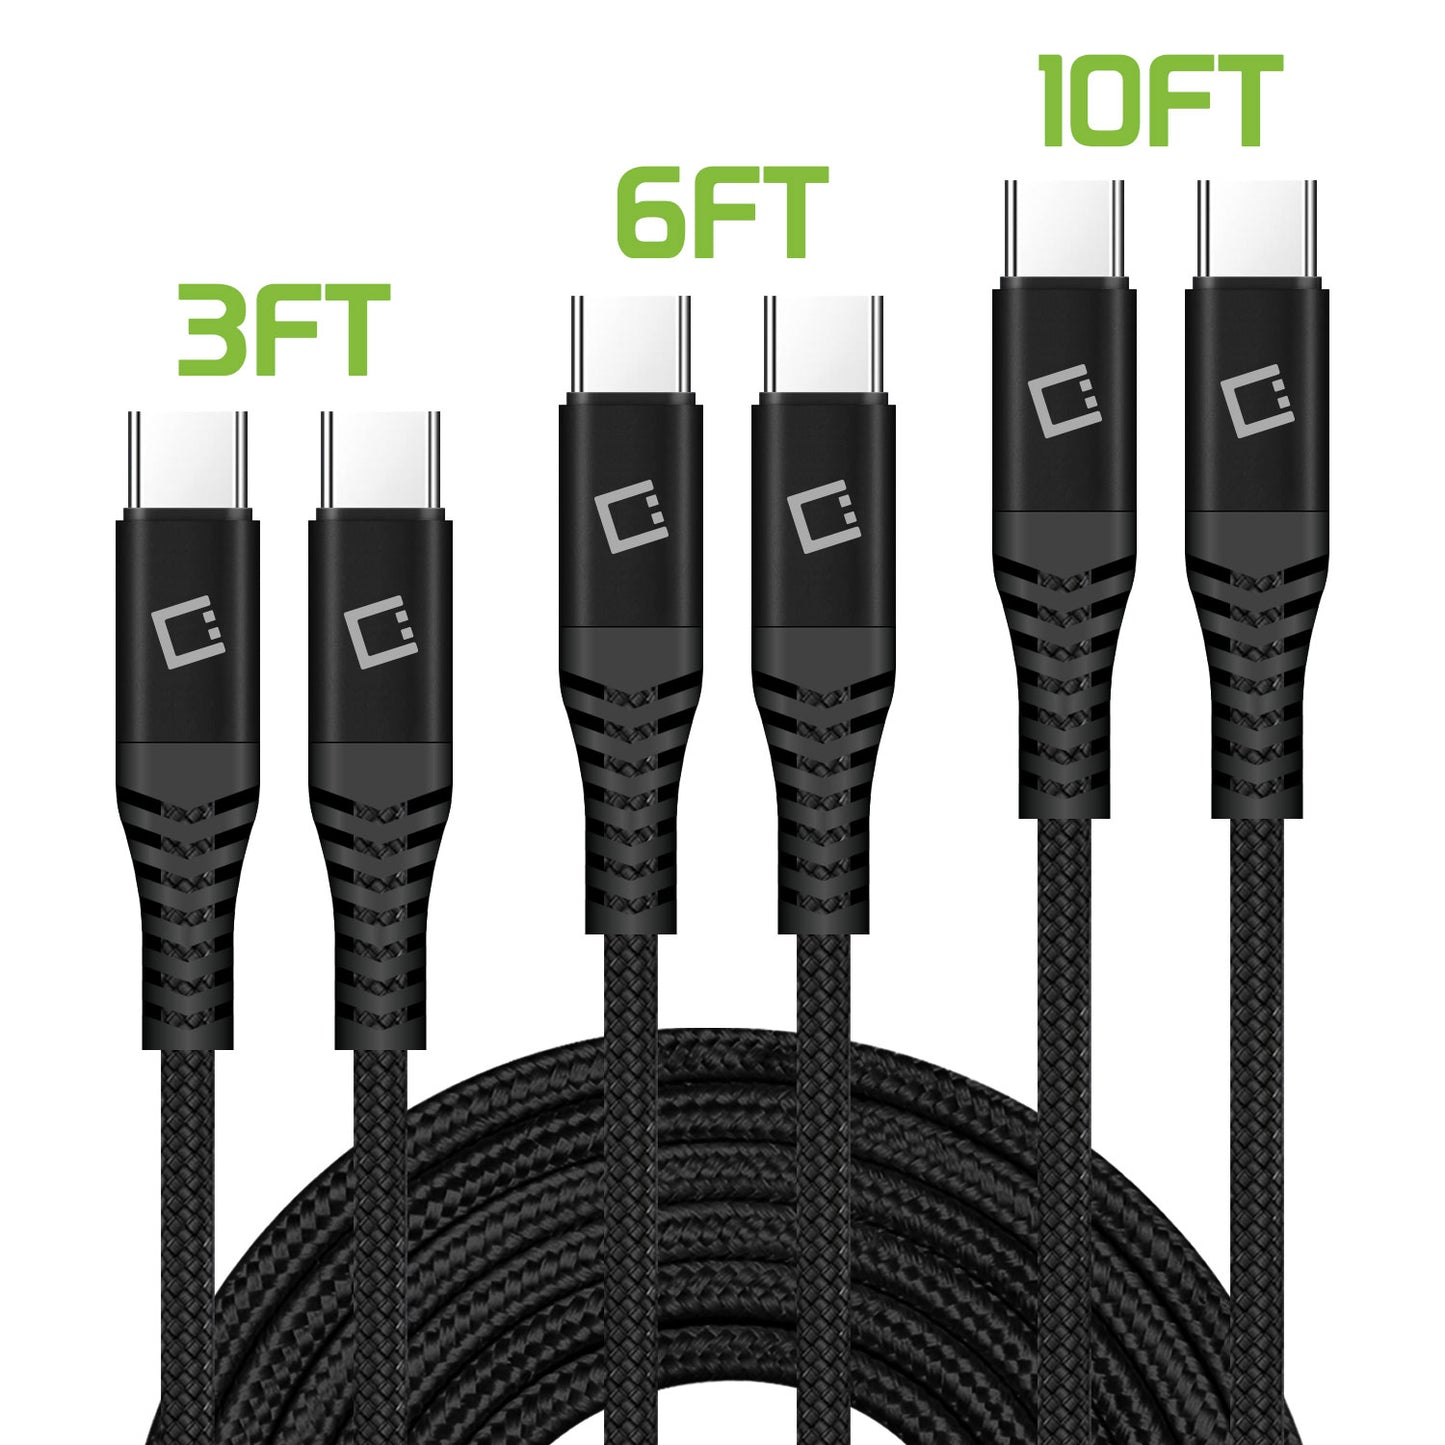 3 Pack 3ft, 6,ft, & 10ft USB-C to USB-C Cables